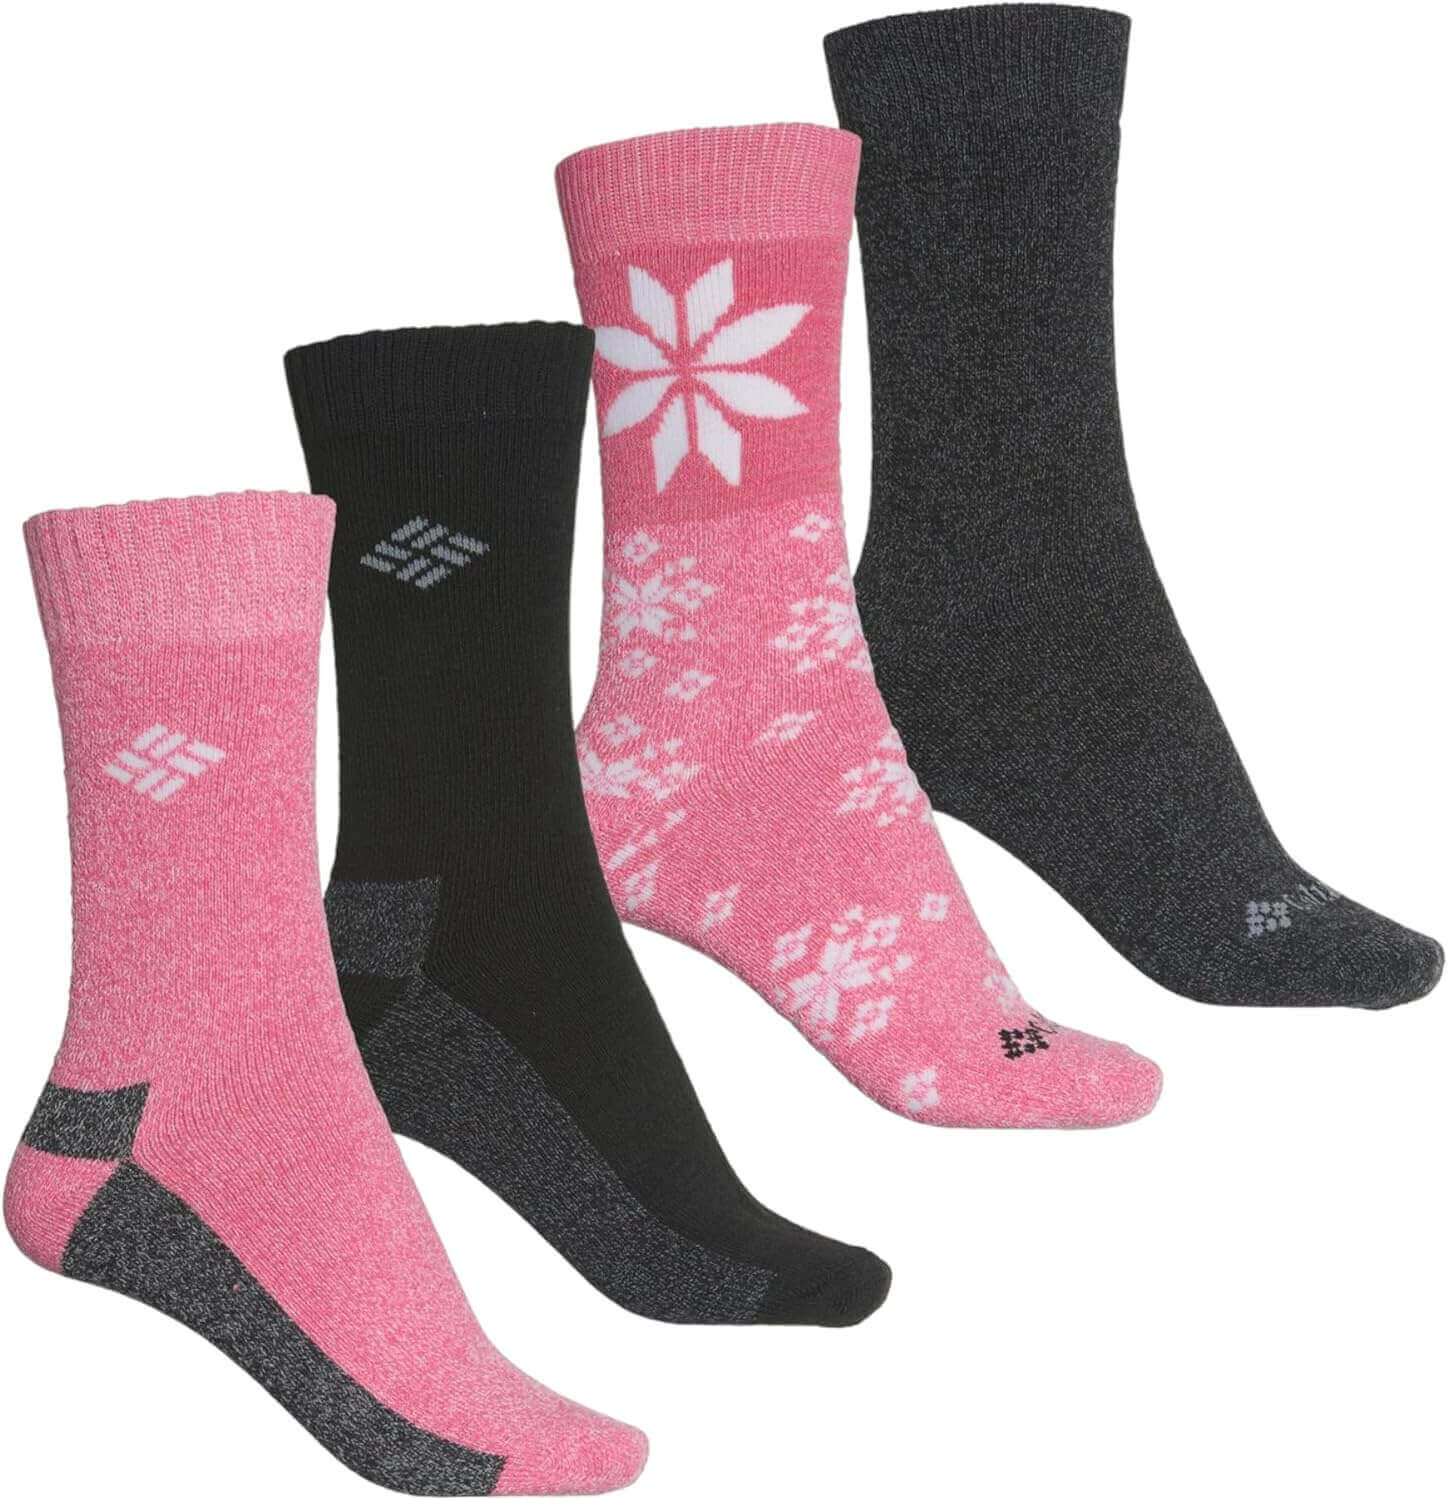 Shop The Latest >Columbia Women's 4 Pack Moisture Control Crew Socks > *Only $47.24*> From The Top Brand > *Columbial* > Shop Now and Get Free Shipping On Orders Over $45.00 >*Shop Earth Foot*